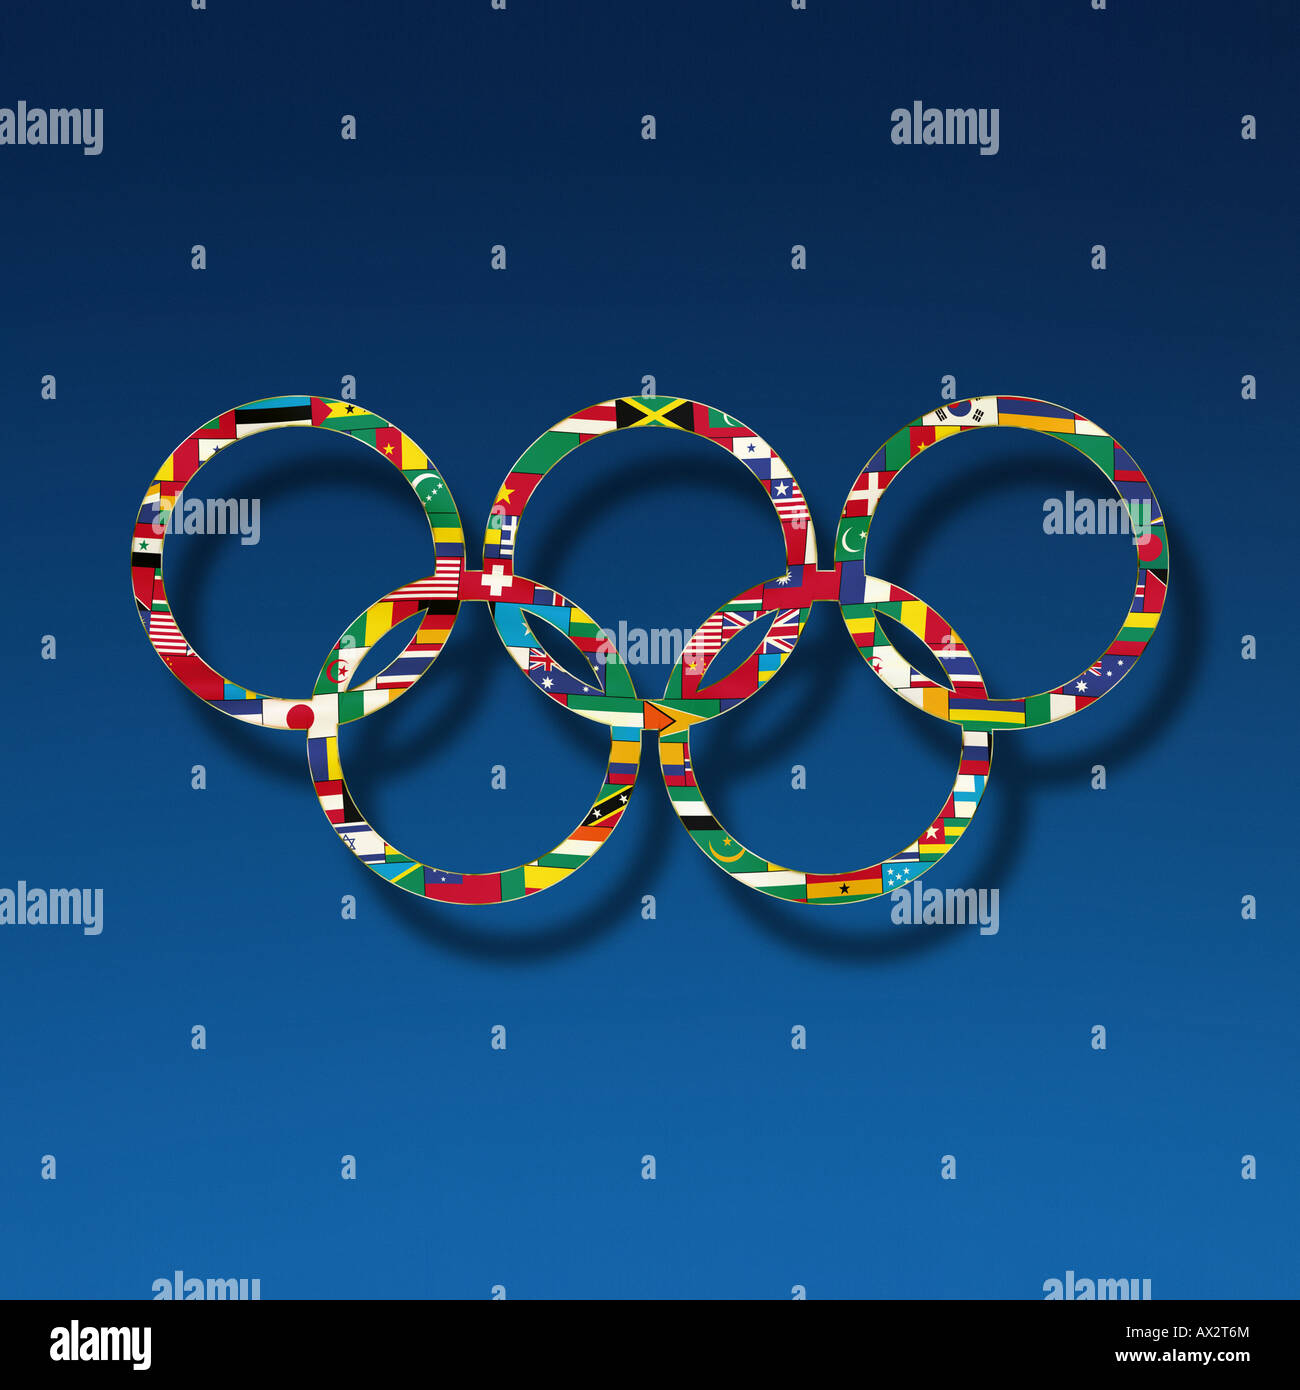 Flag pattern filled olympic rings against a nice blue gradated background Stock Photo